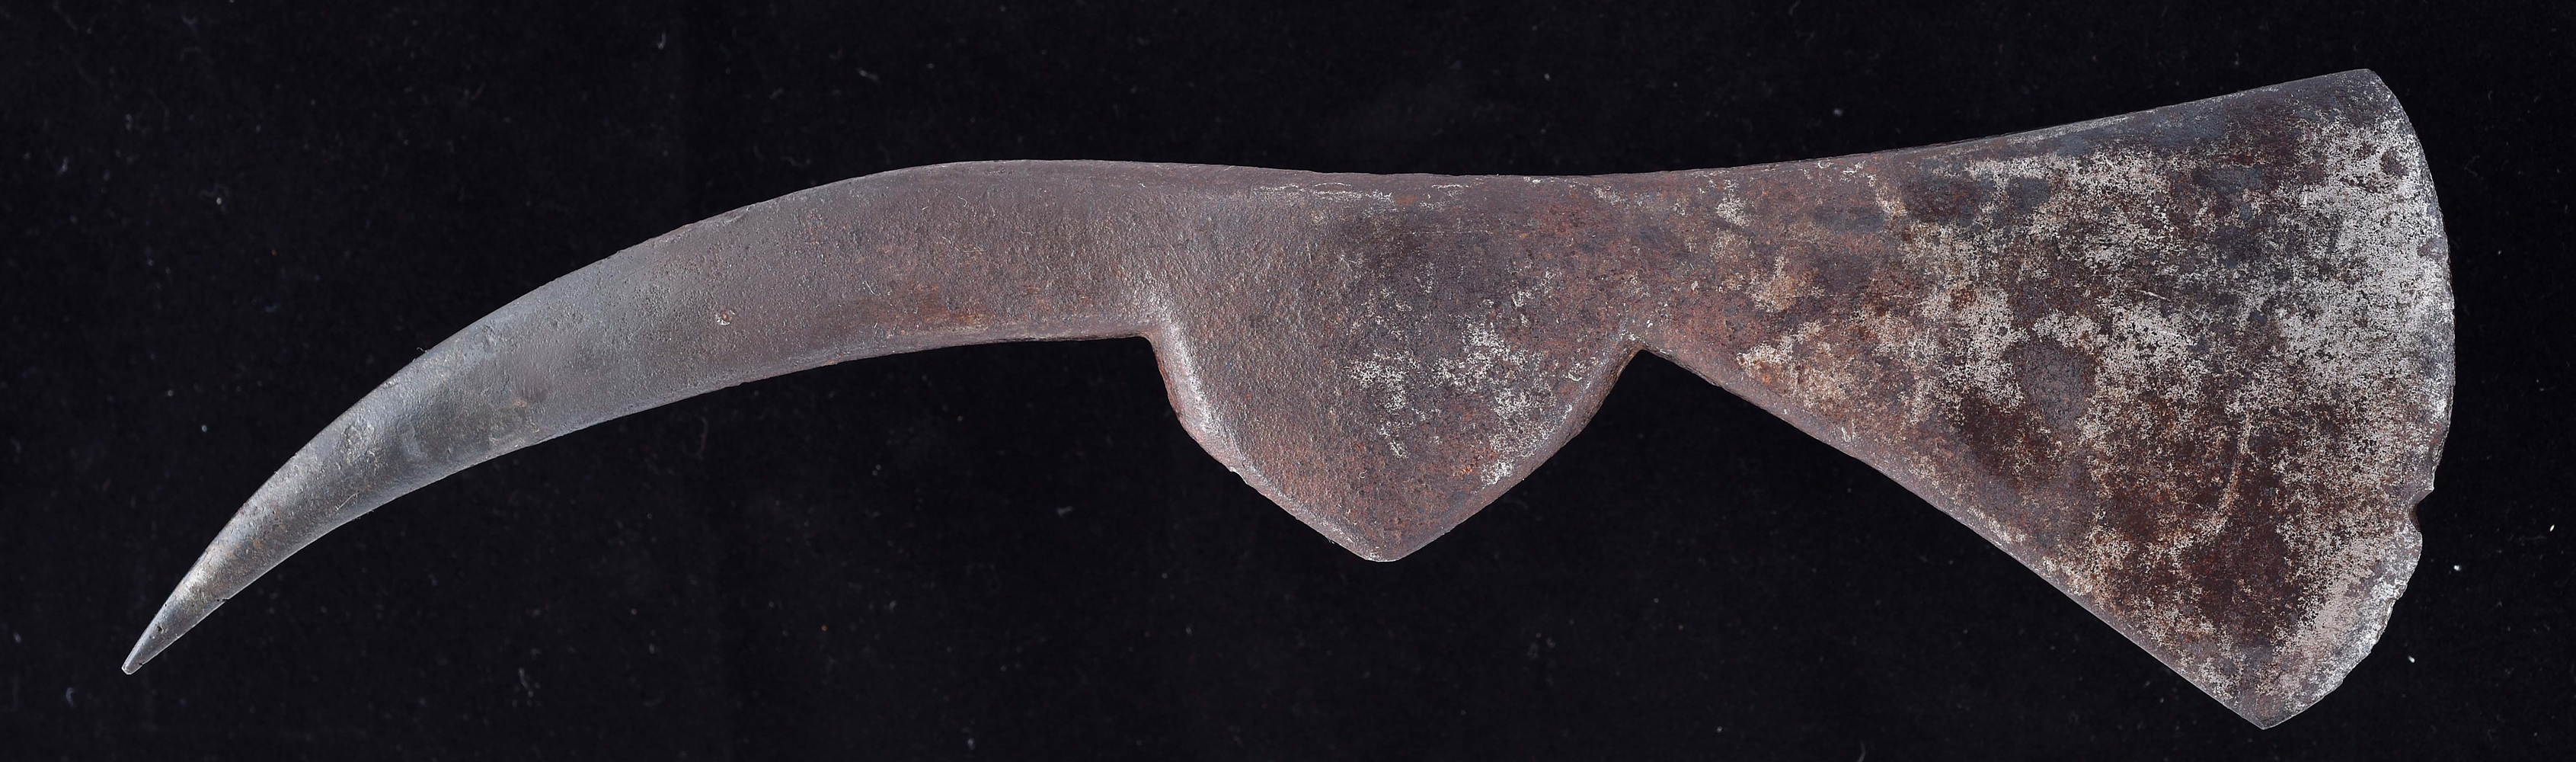 LARGE 18TH CENTURY SPIKE TOMAHAWK HEAD WITH FORT WILLIAM HENRY PROVENANCE.